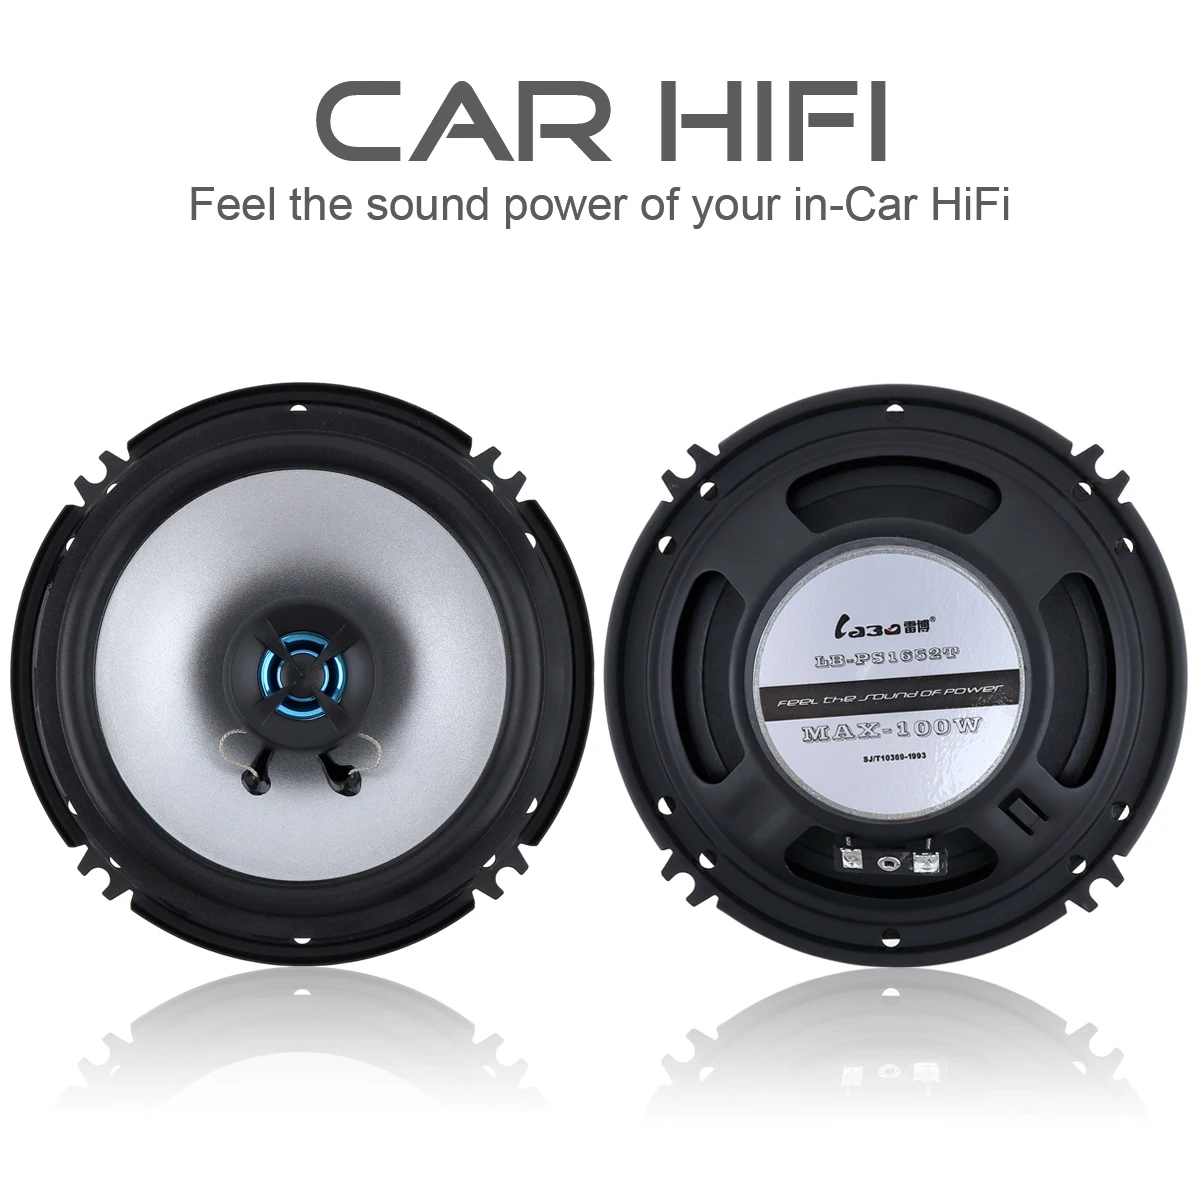 2pcs LB-PS1652T 100W 2 Way Car Coaxial Vehicle Door Auto Audio Music Stereo Full Range Frequency Hifi Speakers 2pcs lb ps1652t 100w 2 way car coaxial vehicle door auto audio music stereo full range frequency hifi speakers